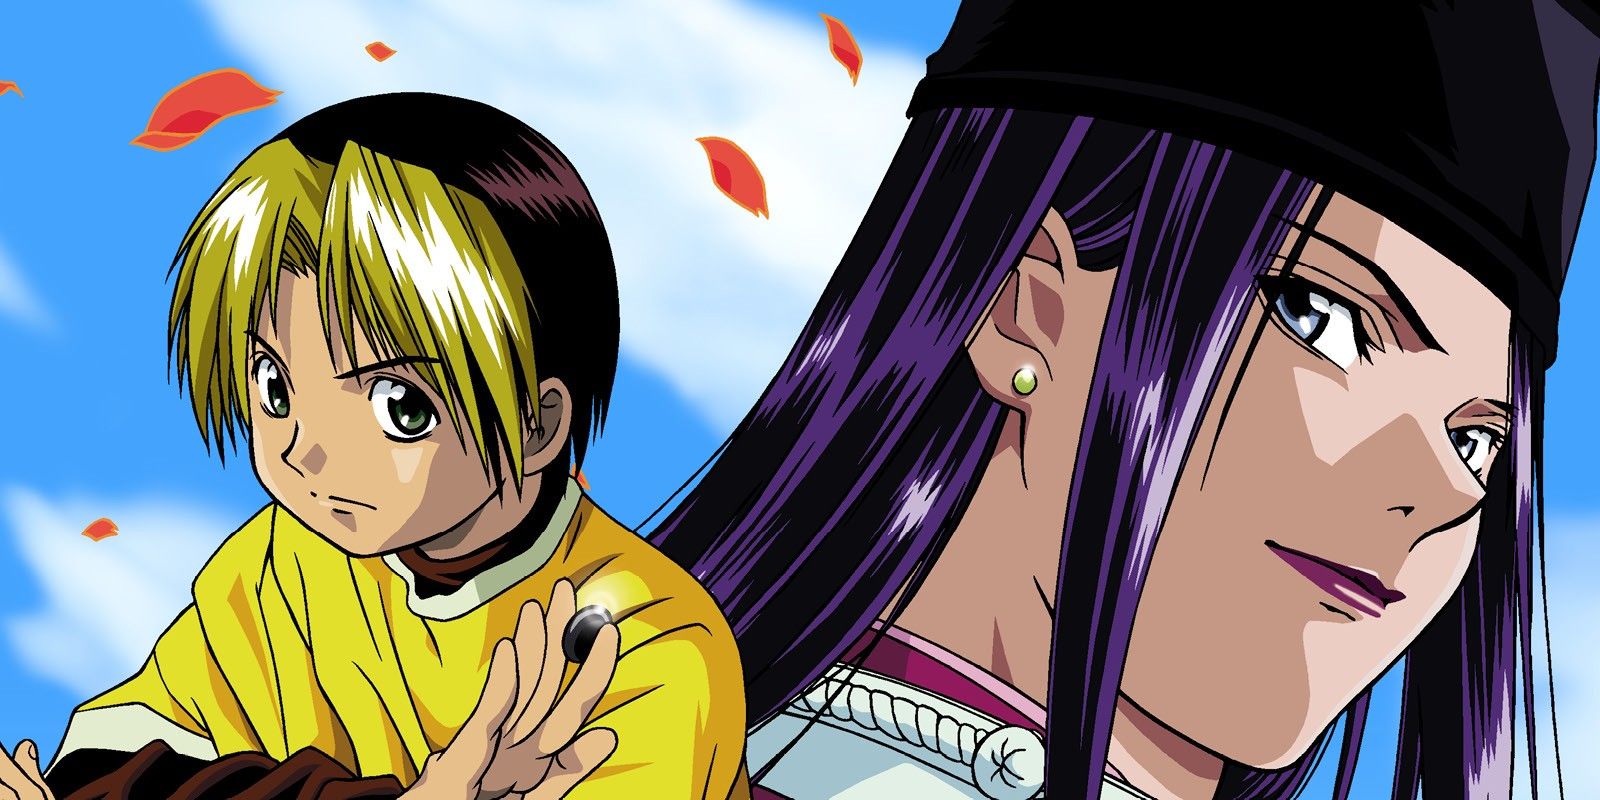 Characters from the Hakaru no Go anime series.